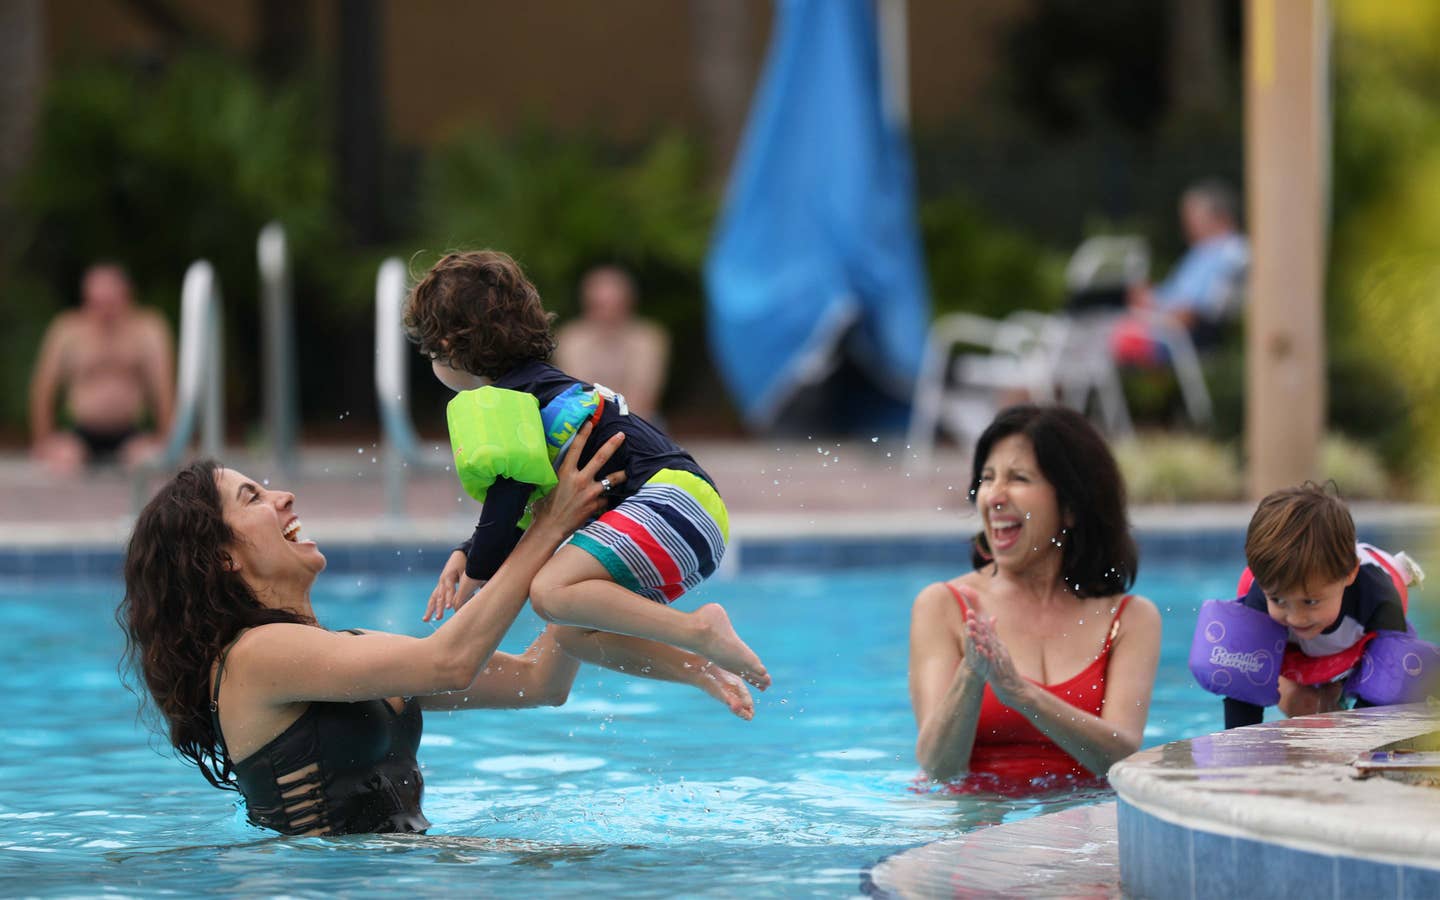 Mother playing with child in outdoor pool.